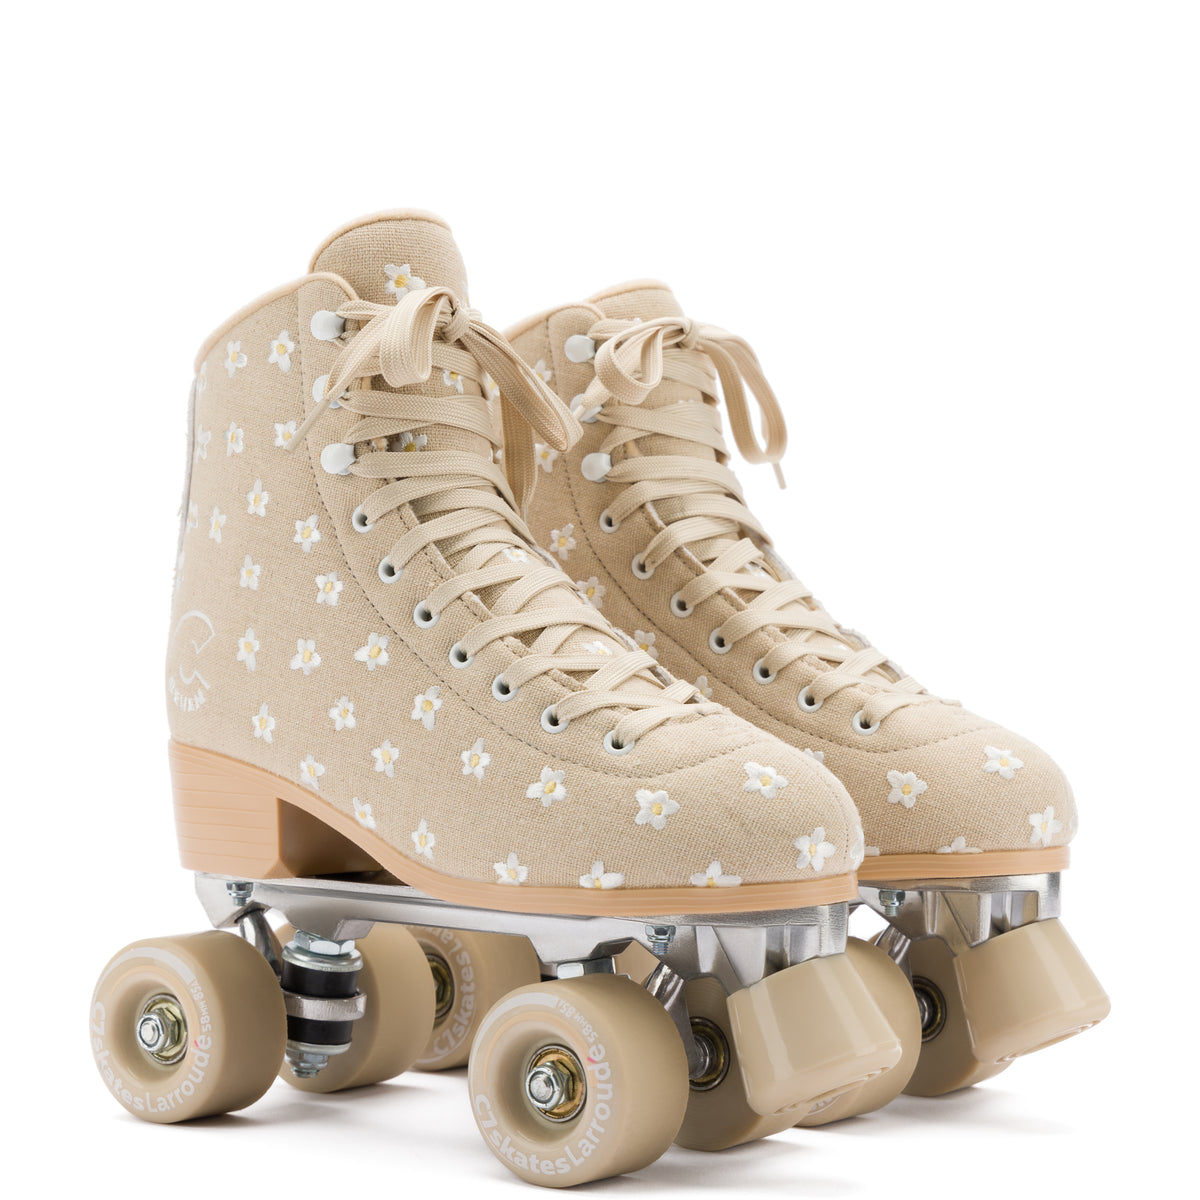 Larroudé x C7 Skates In Raffia Fabric and Flower Embroidery